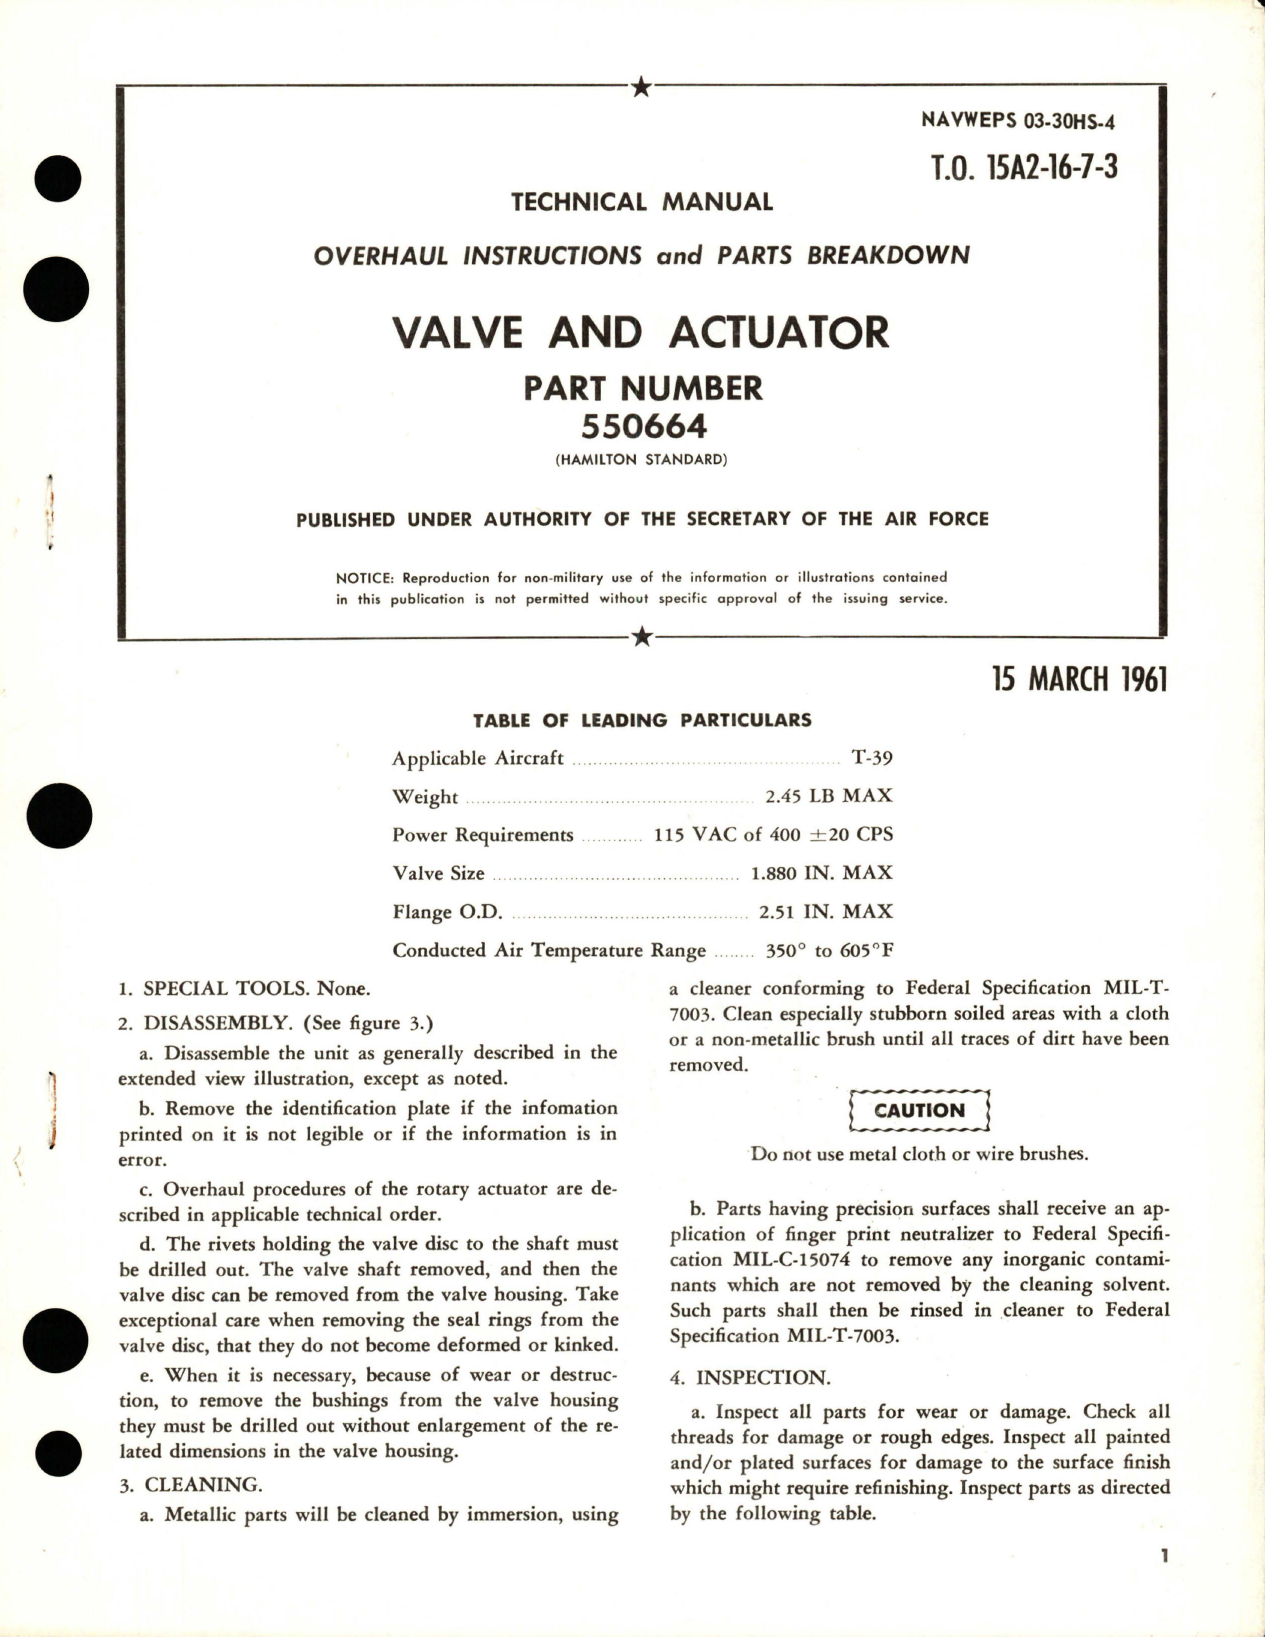 Sample page 1 from AirCorps Library document: Overhaul Instructions with Parts Breakdown for Valve and Actuator - Part 550664 